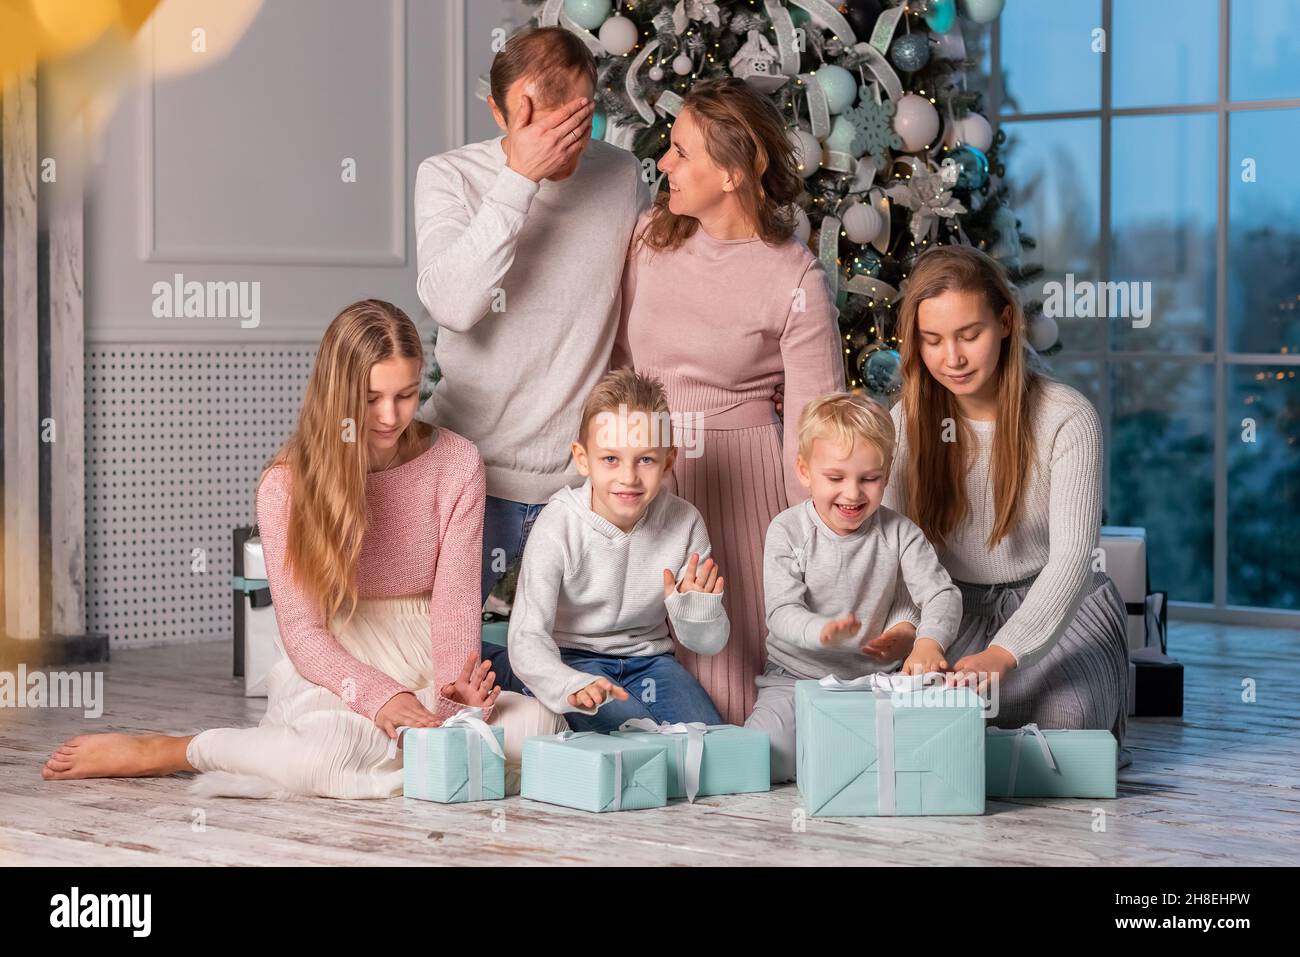 Big Happy family with many kids having fun and opening presents under the Christmas tree. Christmas family eve, christmas mood concept Stock Photo